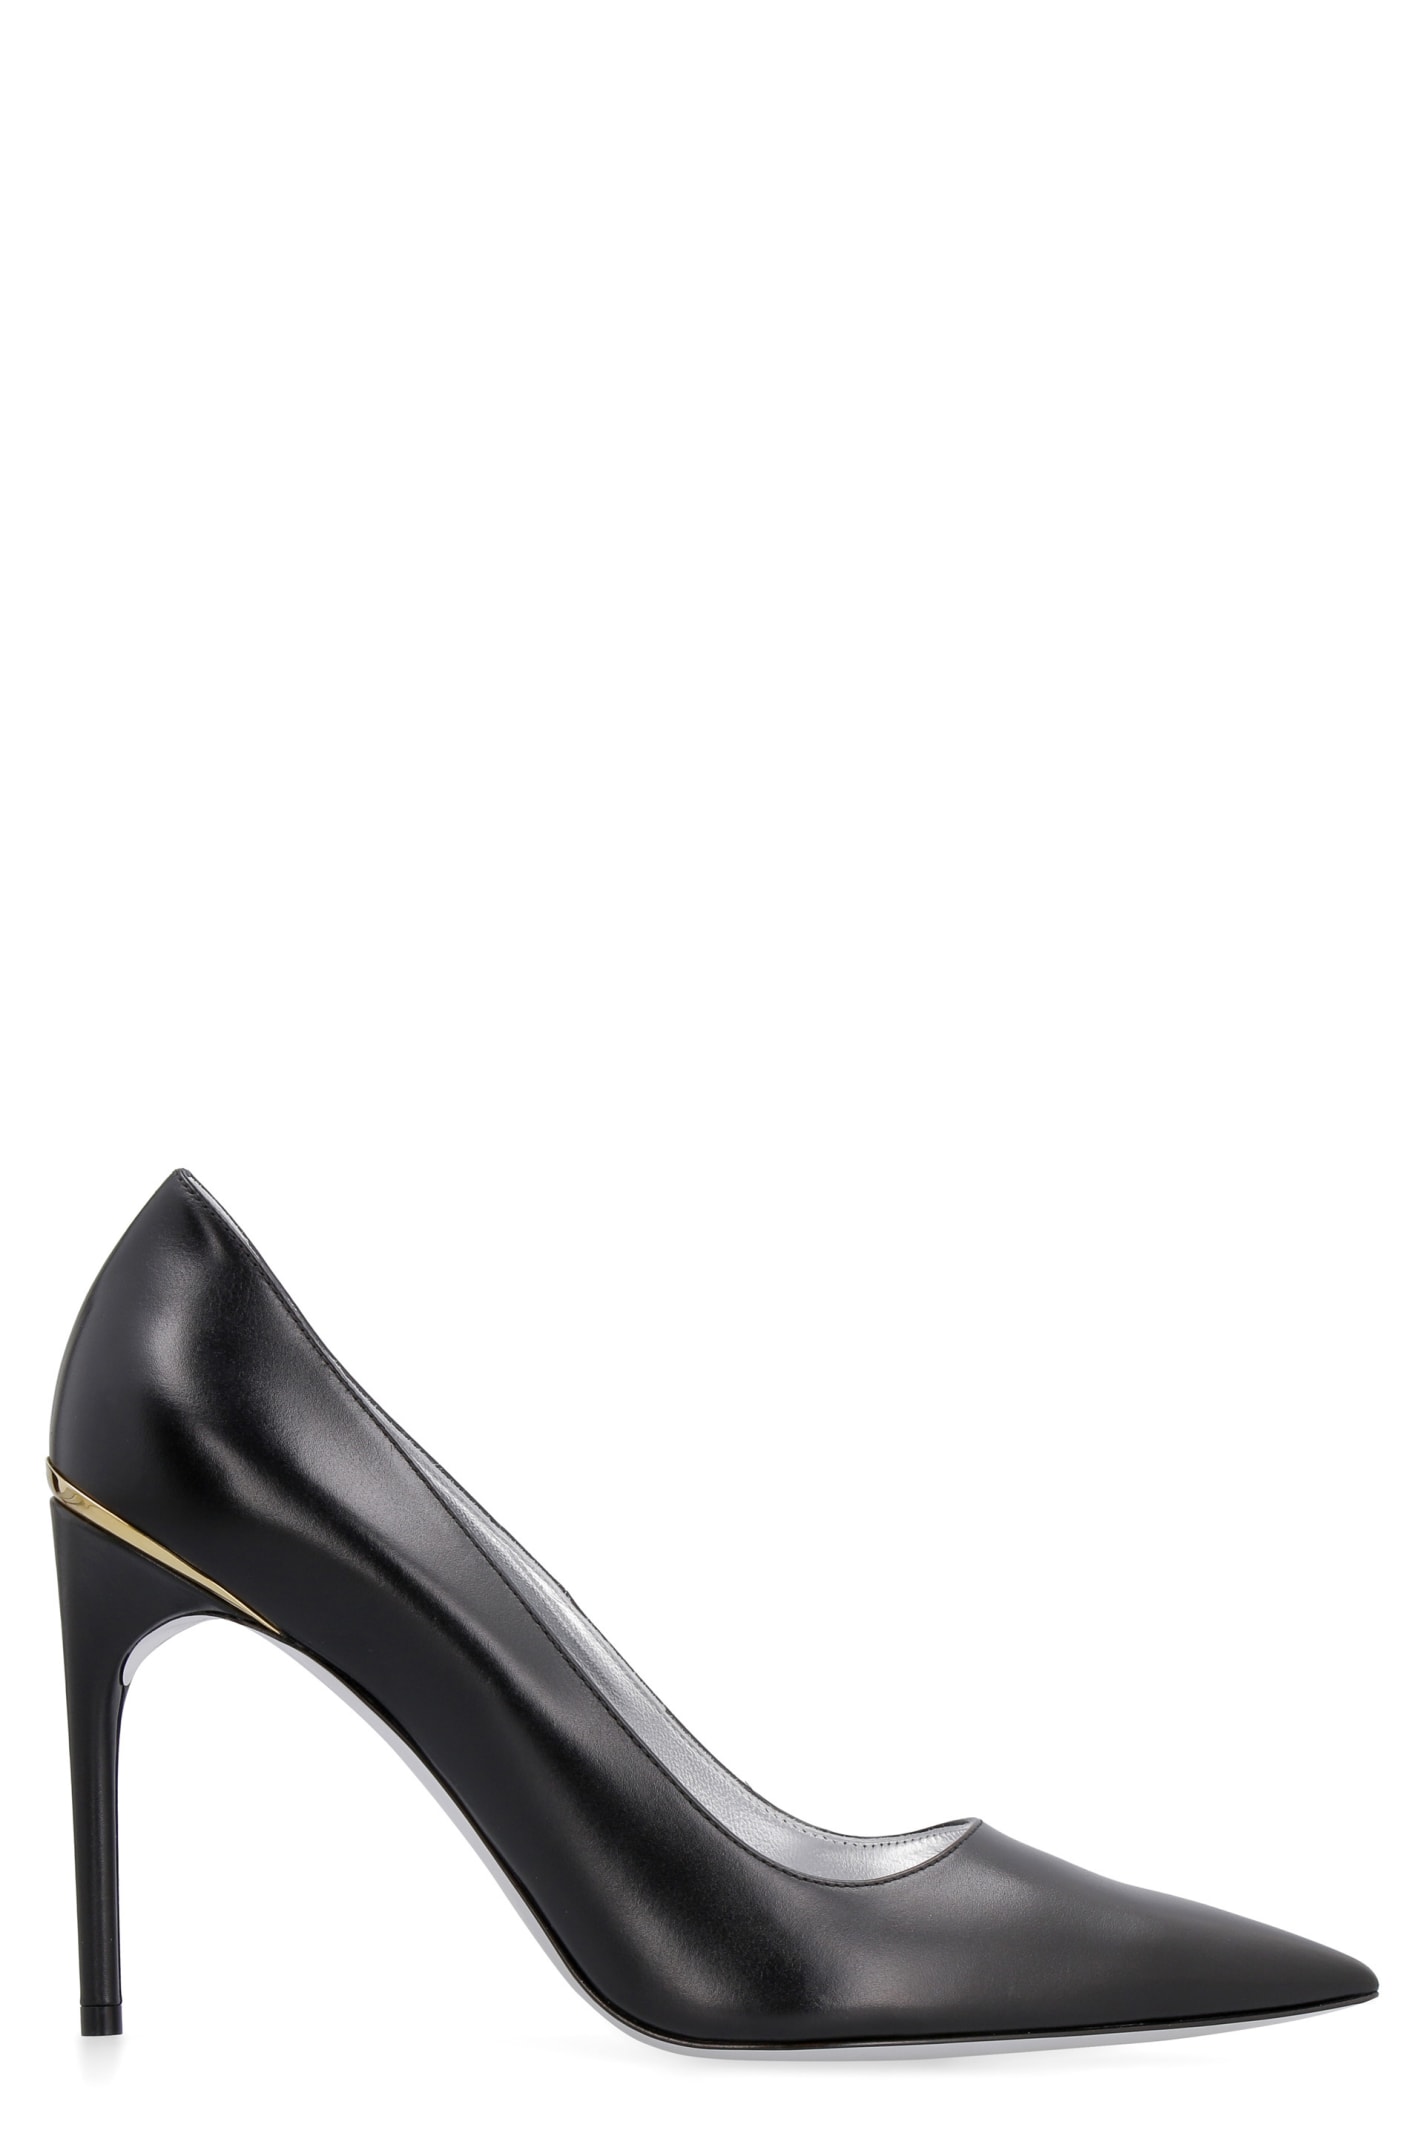 Givenchy Leather Pointy-toe Pumps